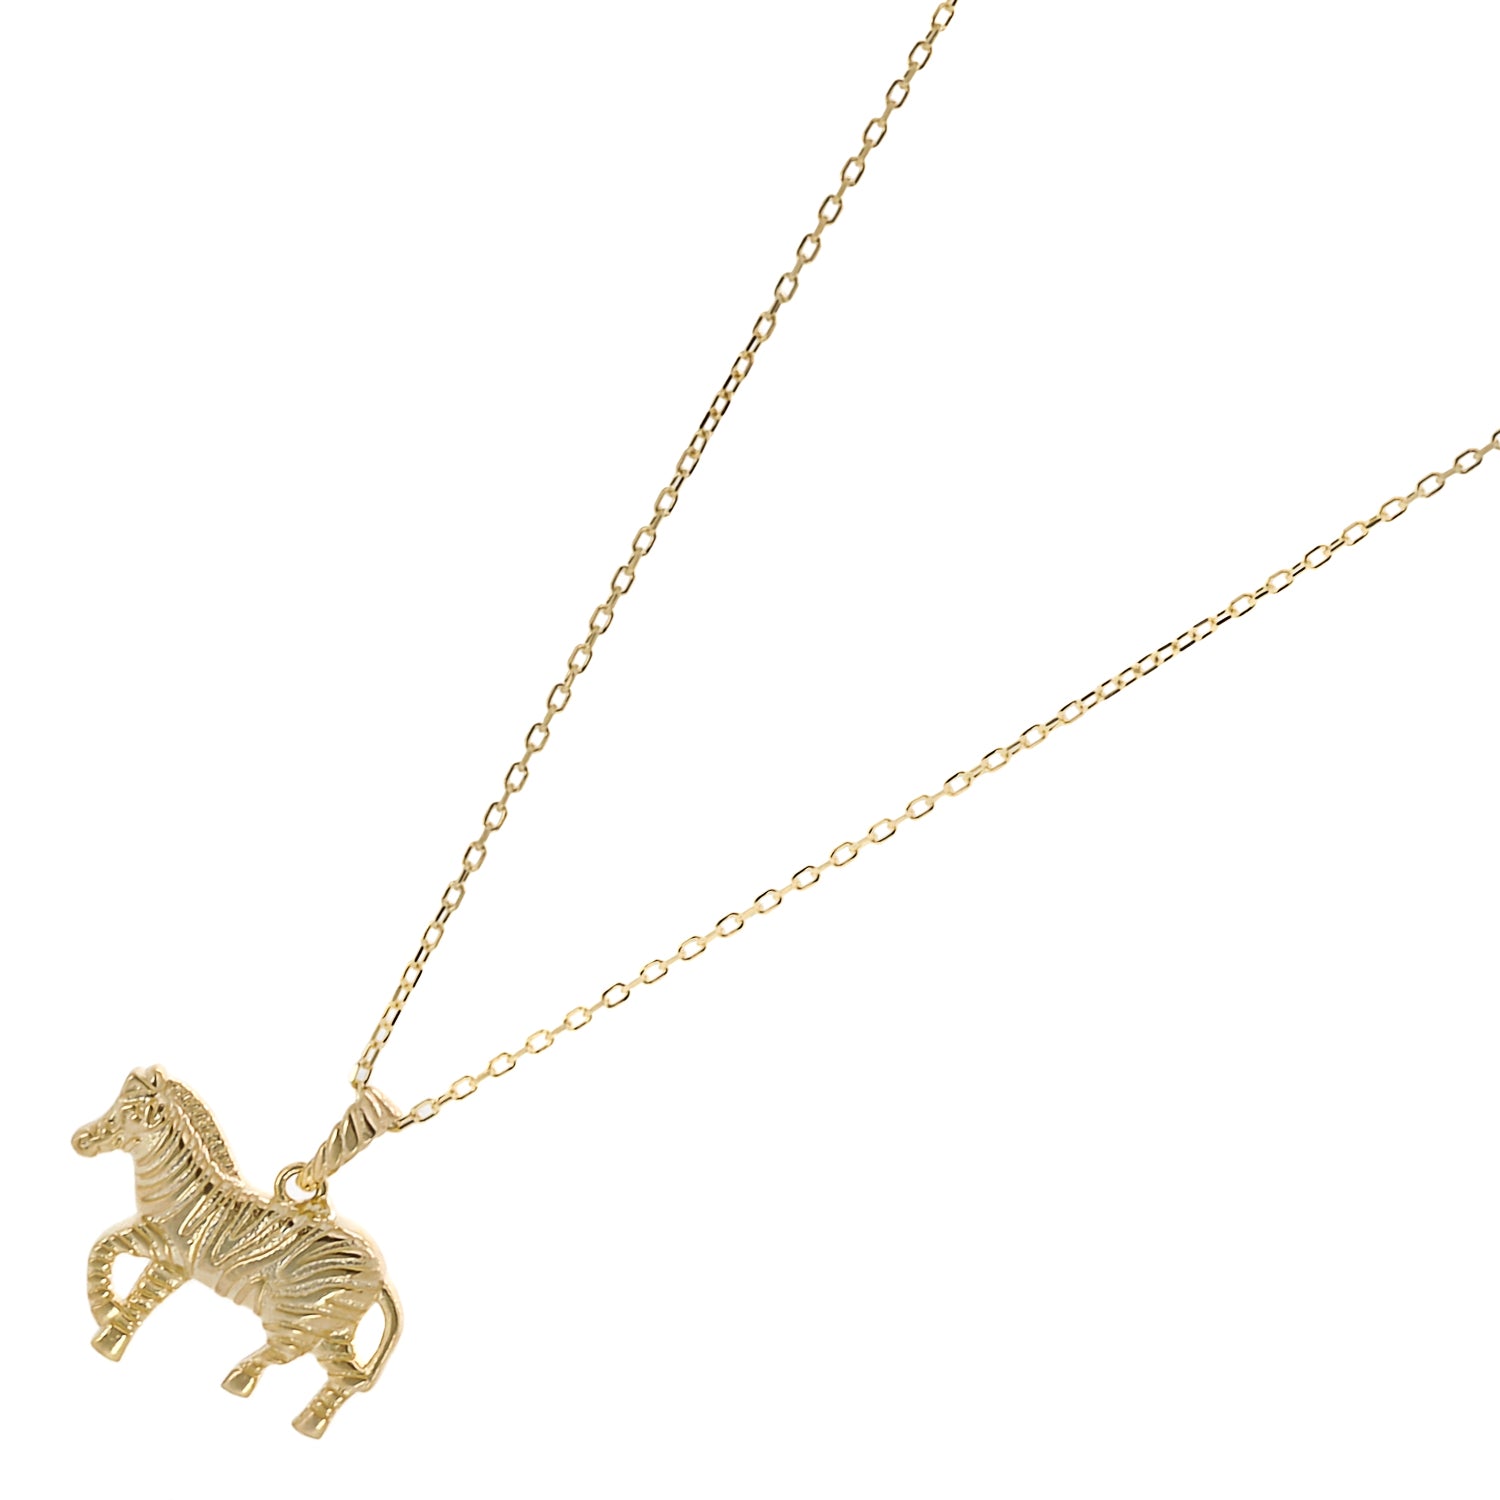 A detailed shot of the Gold Zebra Necklace, highlighting the radiant shine of the 18K gold plated chain.